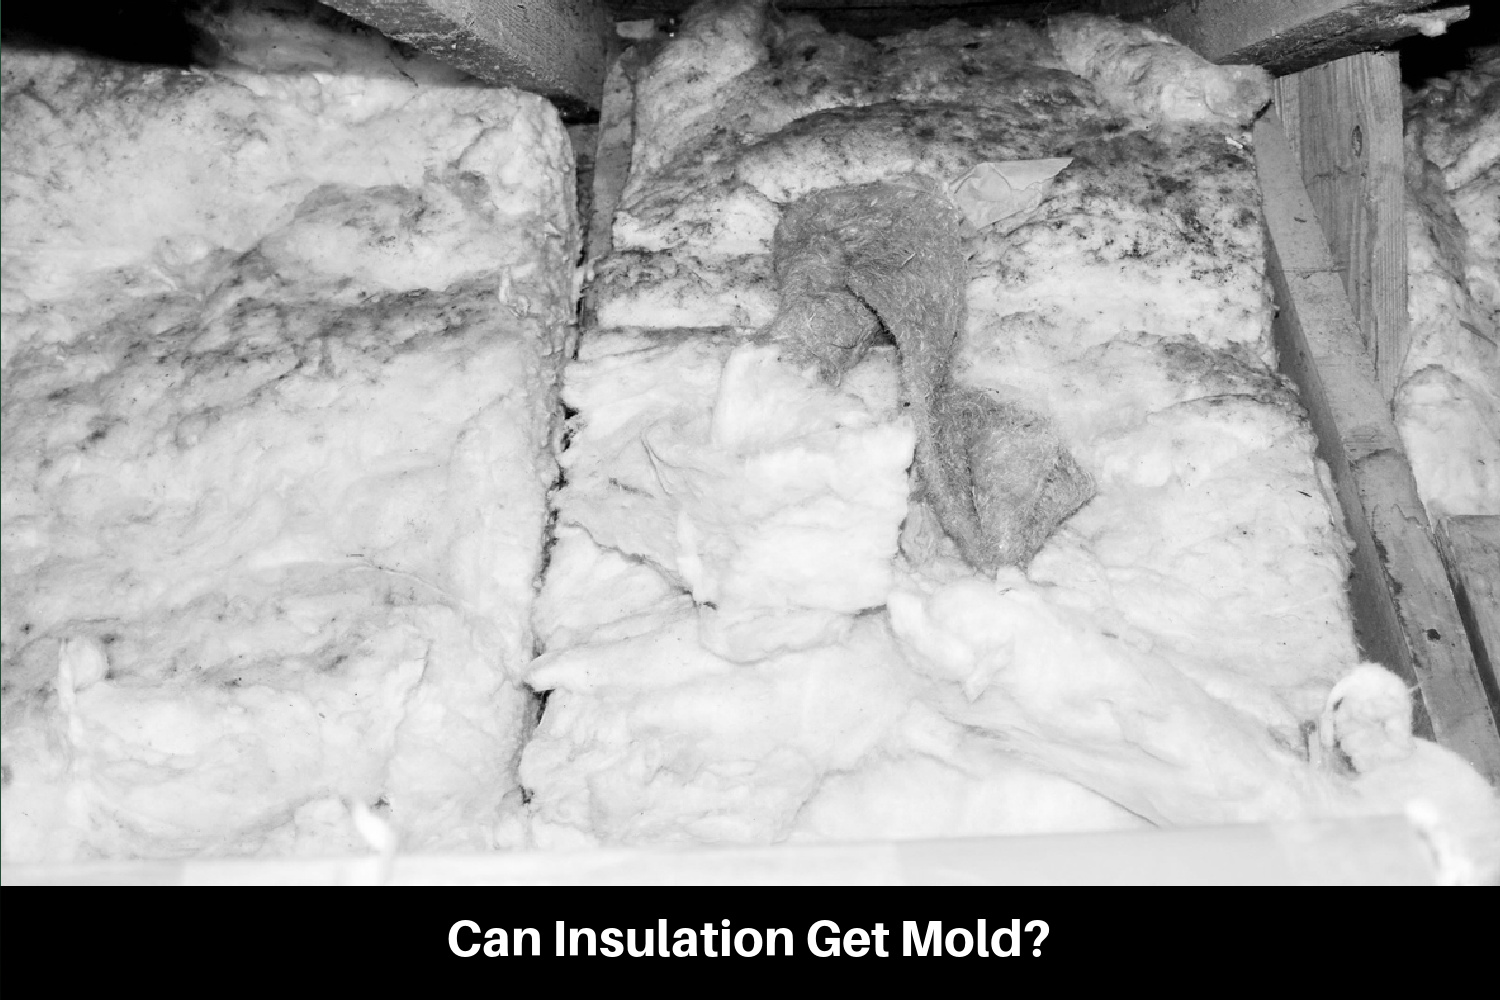 Can Insulation Get Mold?